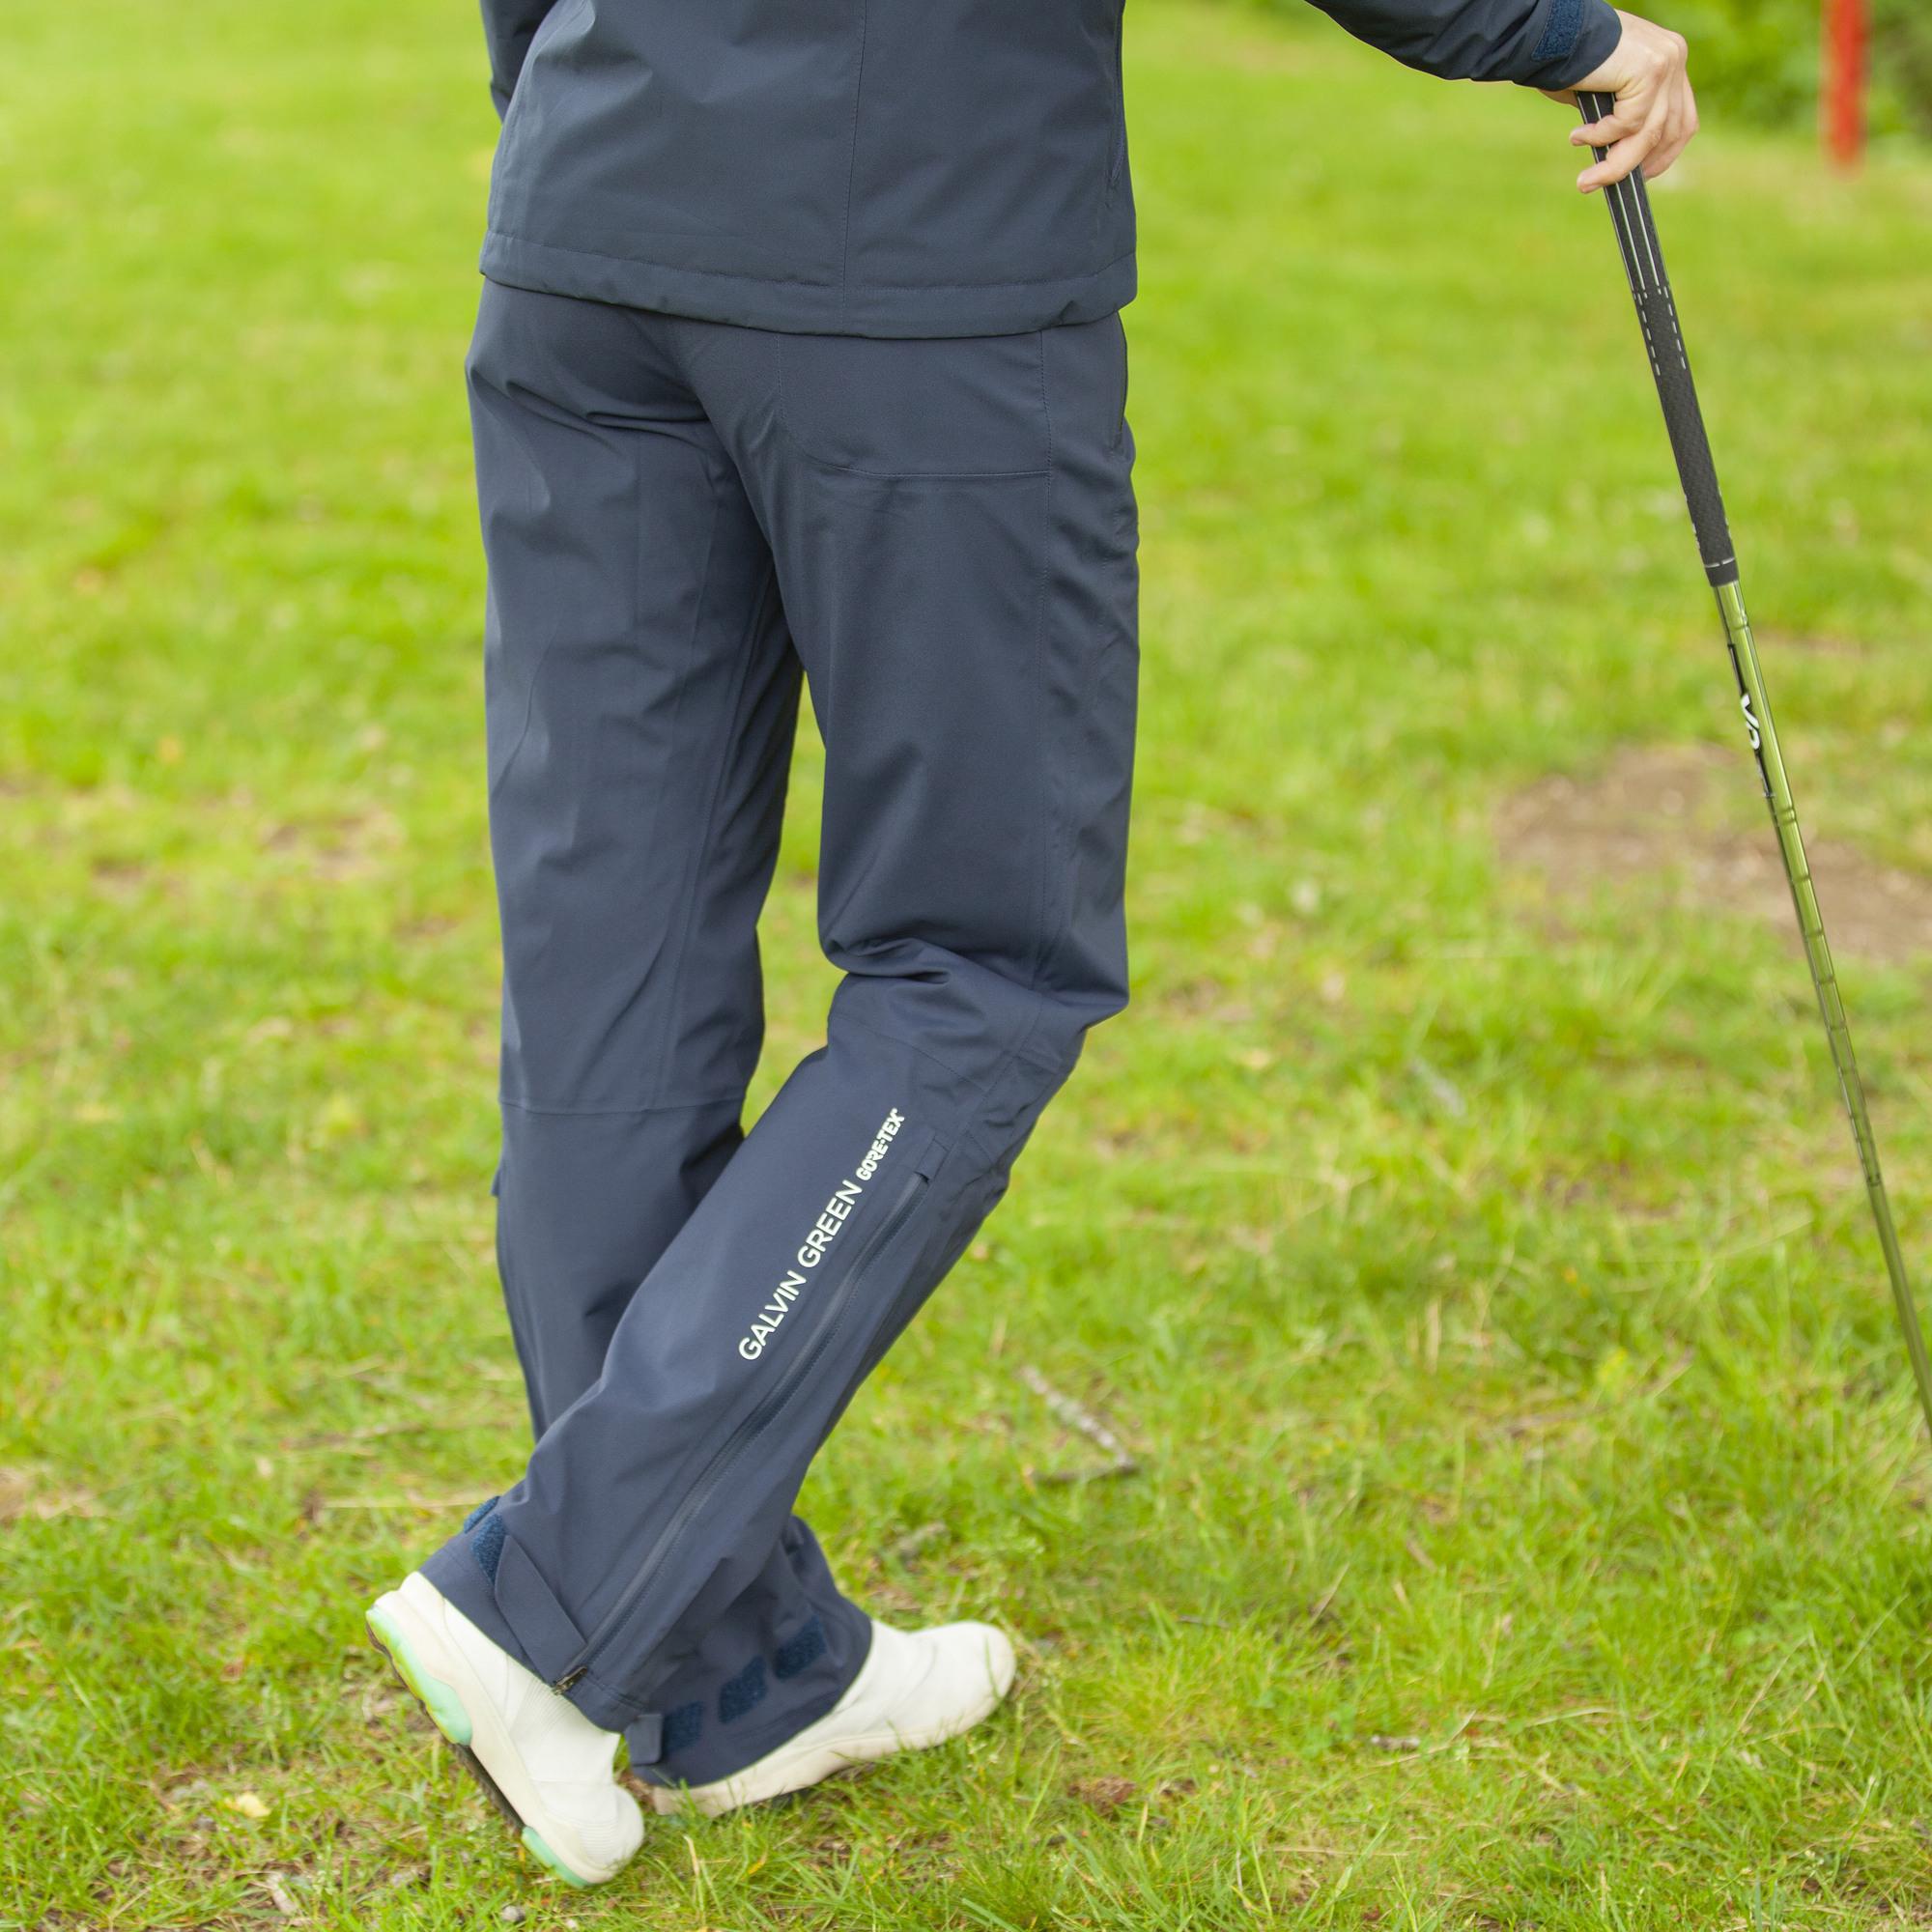 Golf waterproofs: what to look for when buying waterproofs for golf | T3